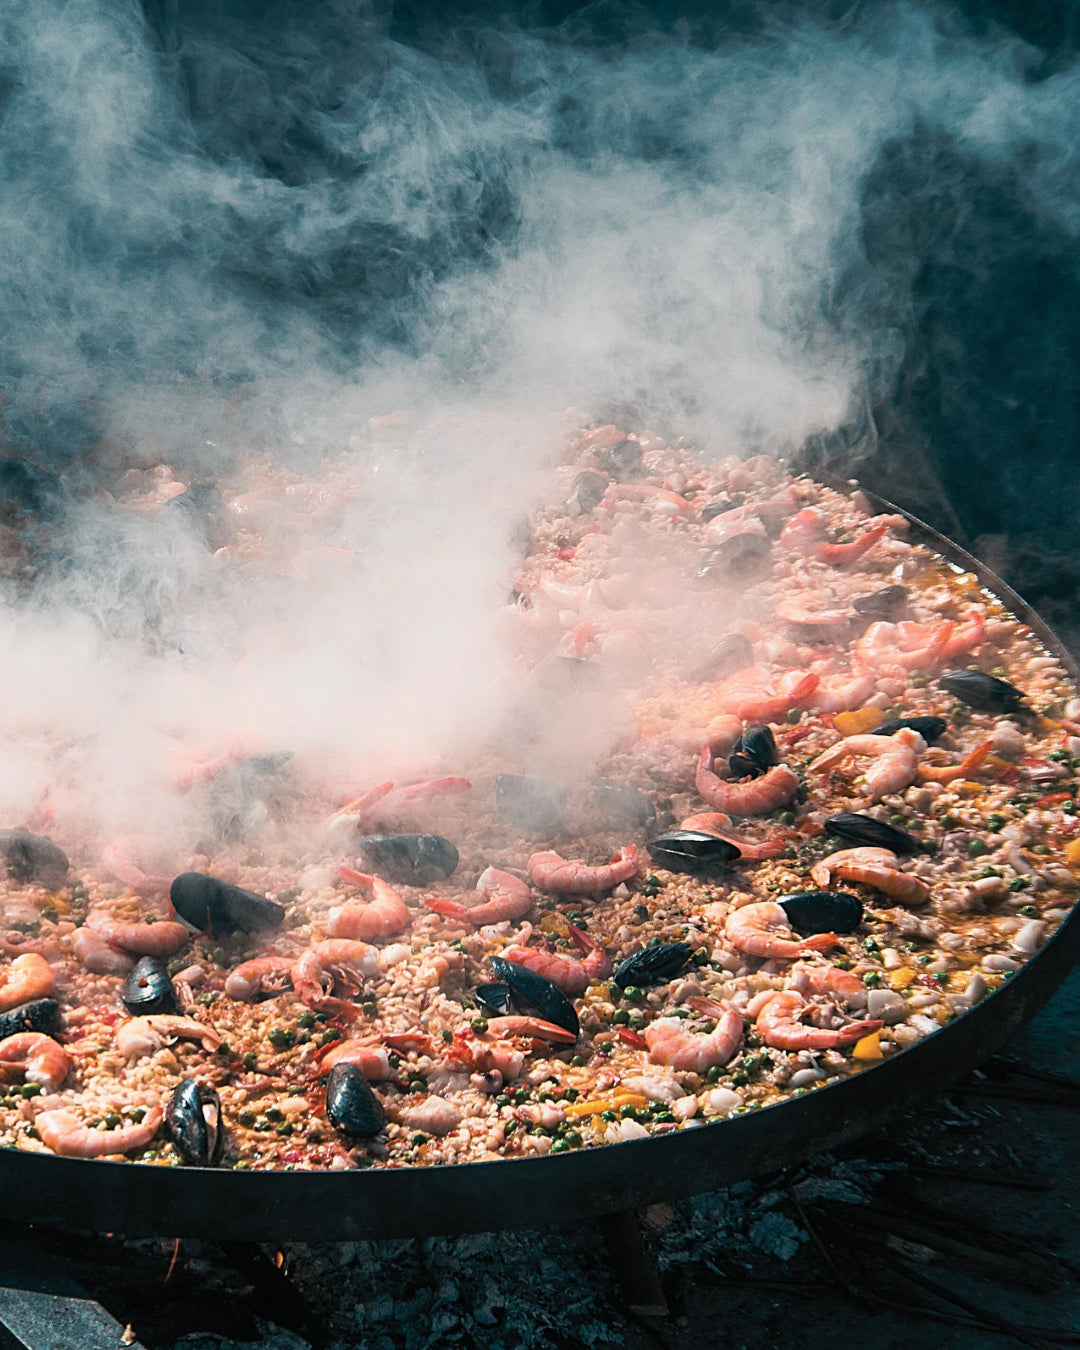 Master the Art of Paella: A Culinary Journey in Ibiza